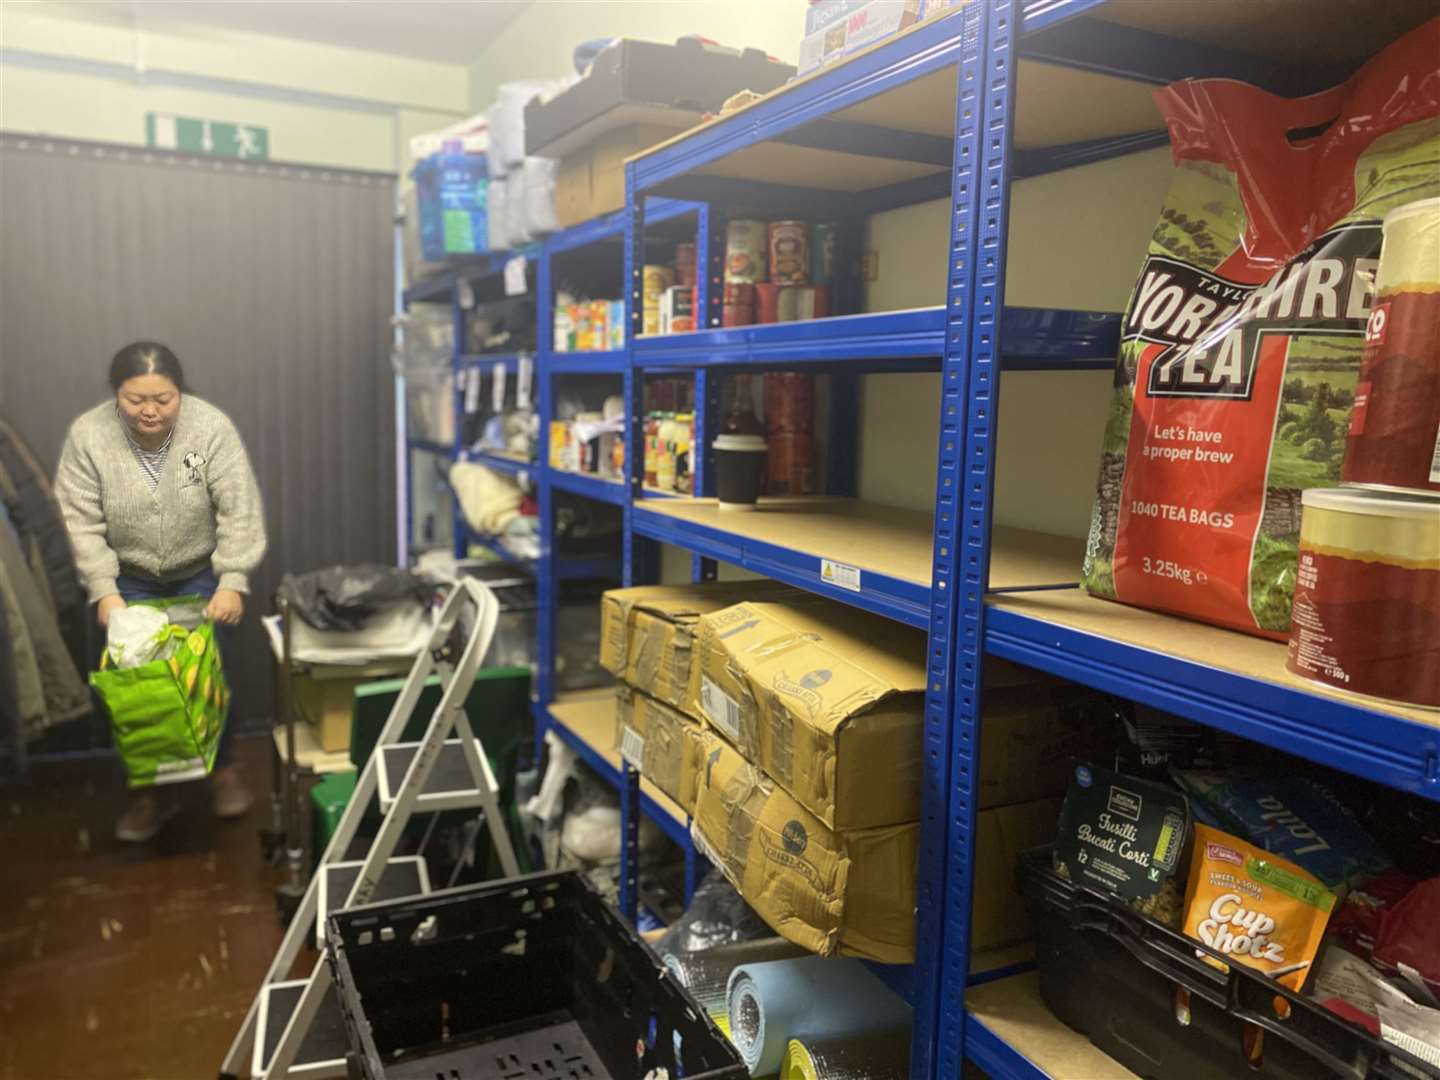 The Gravesend charity is stocked up to ensure the homeless have enough to eat